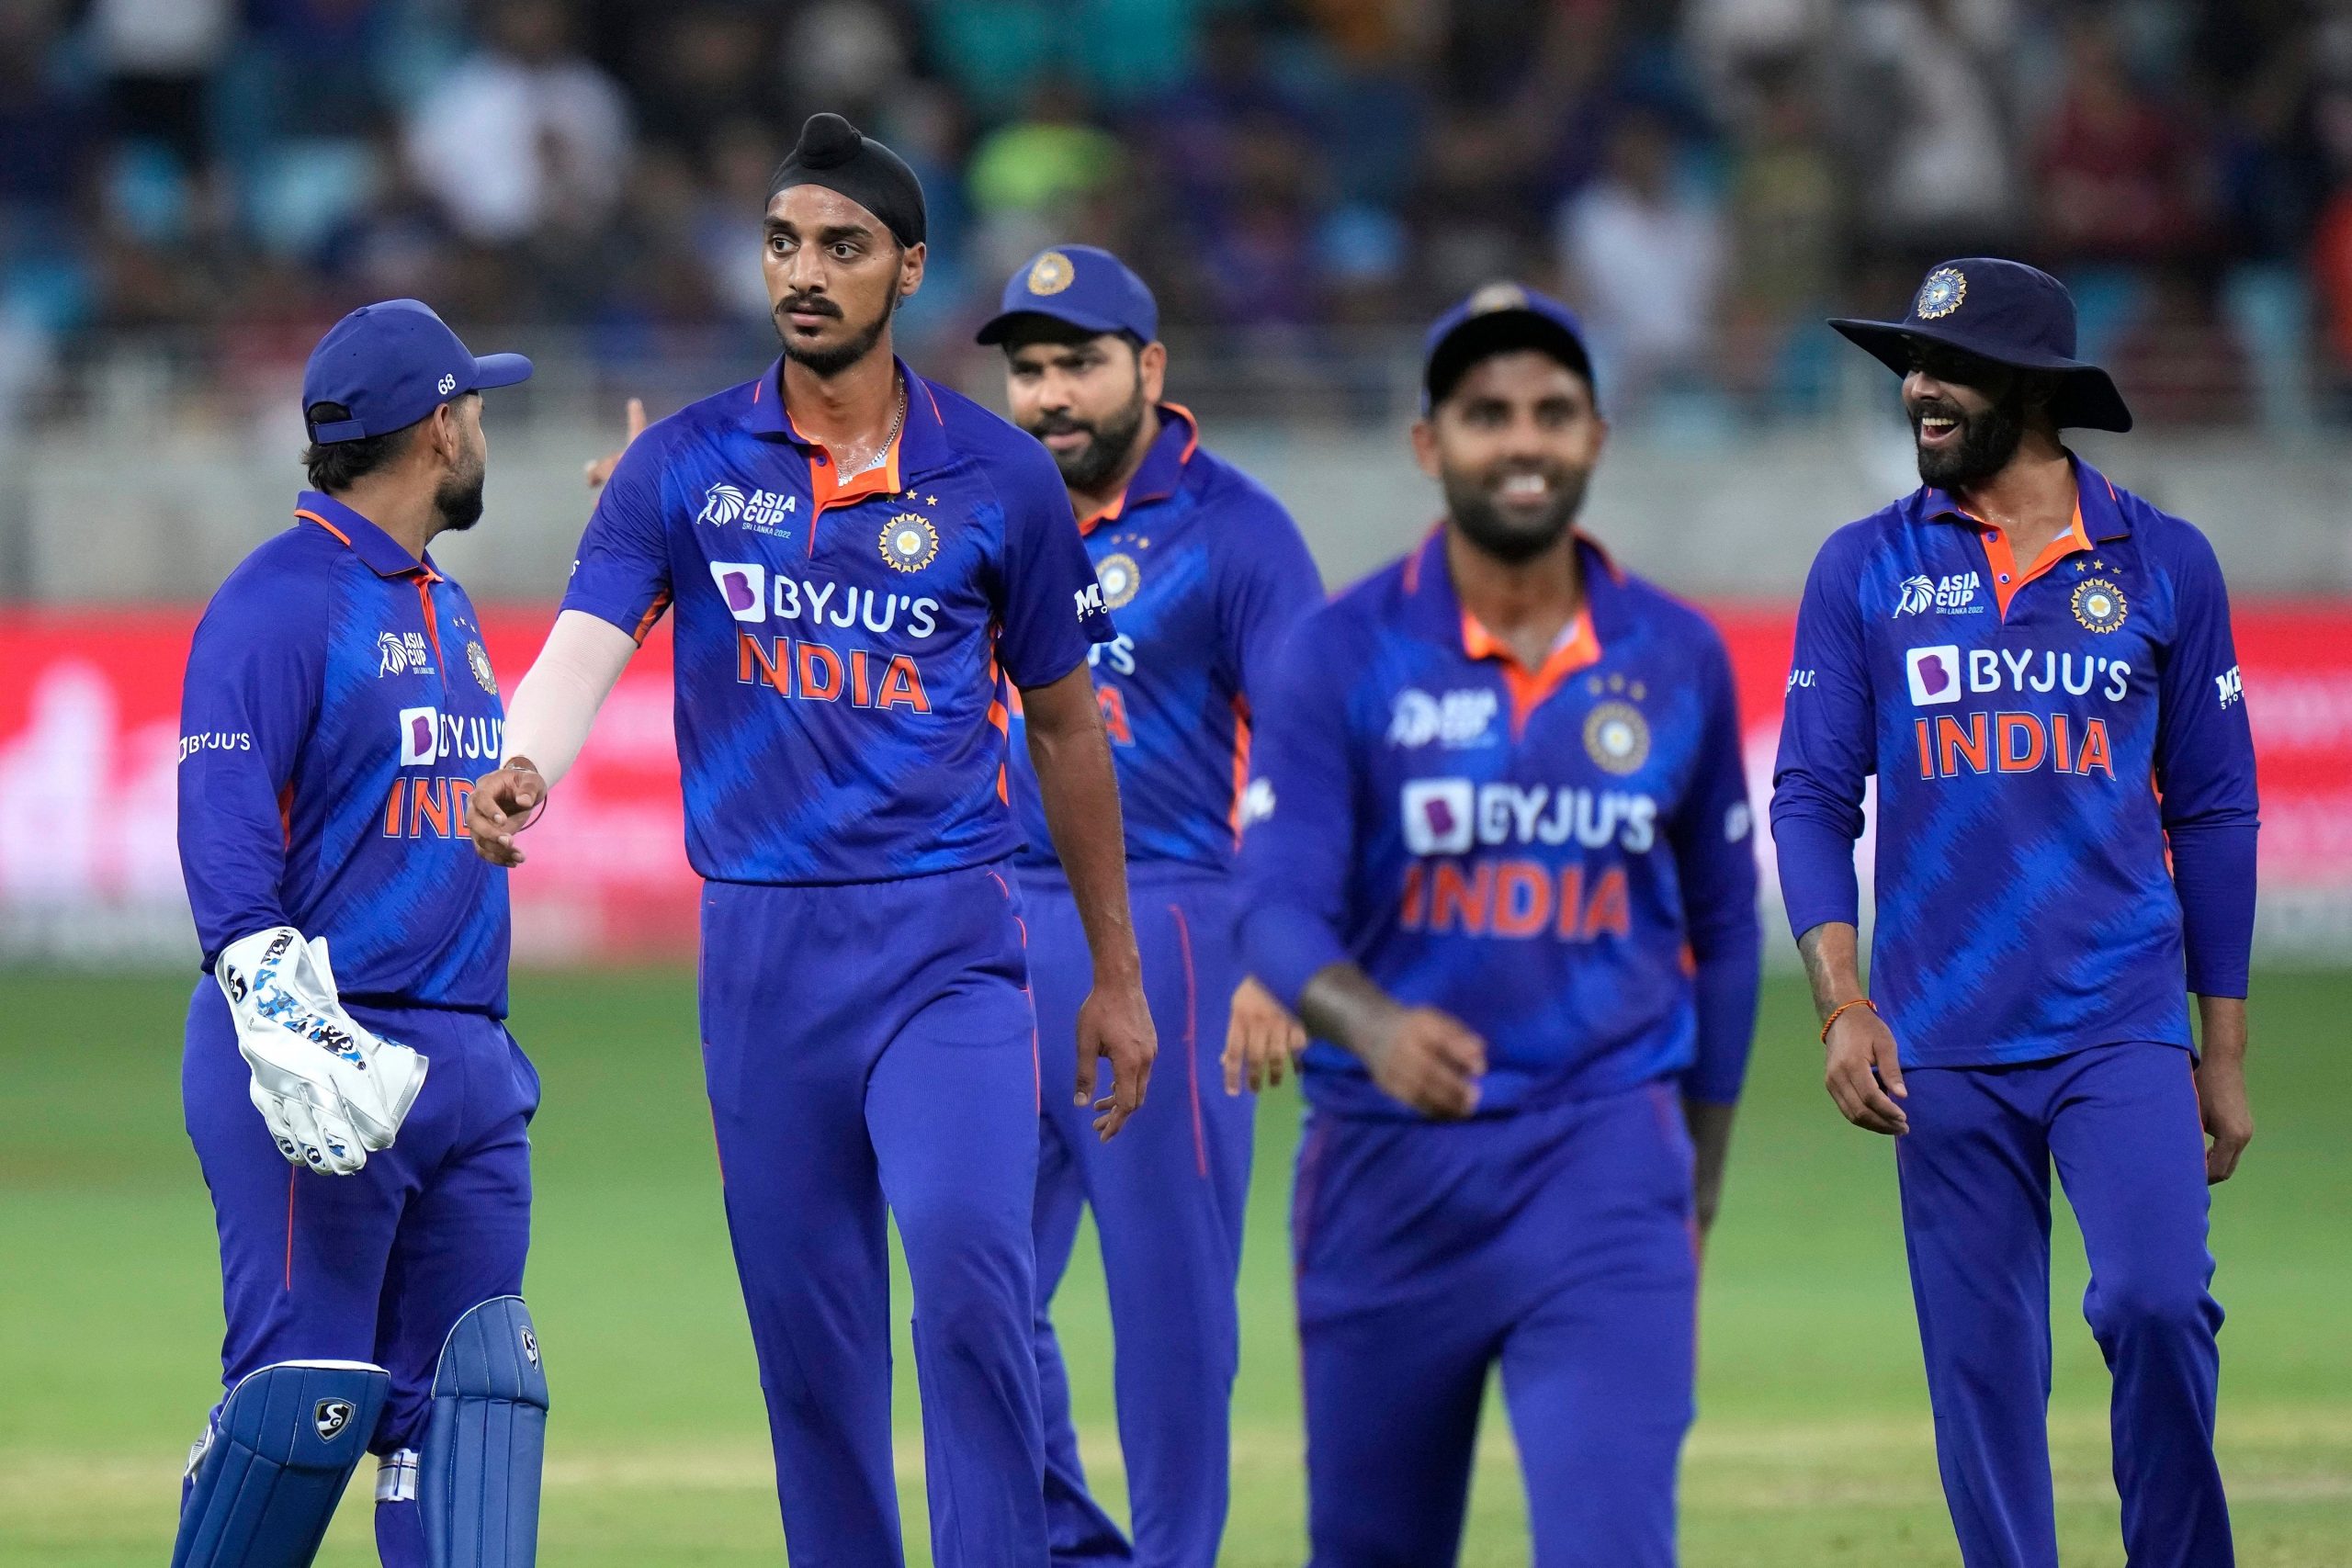 Asia Cup 2022: Afghanistan wins toss, chooses to bowl first vs India